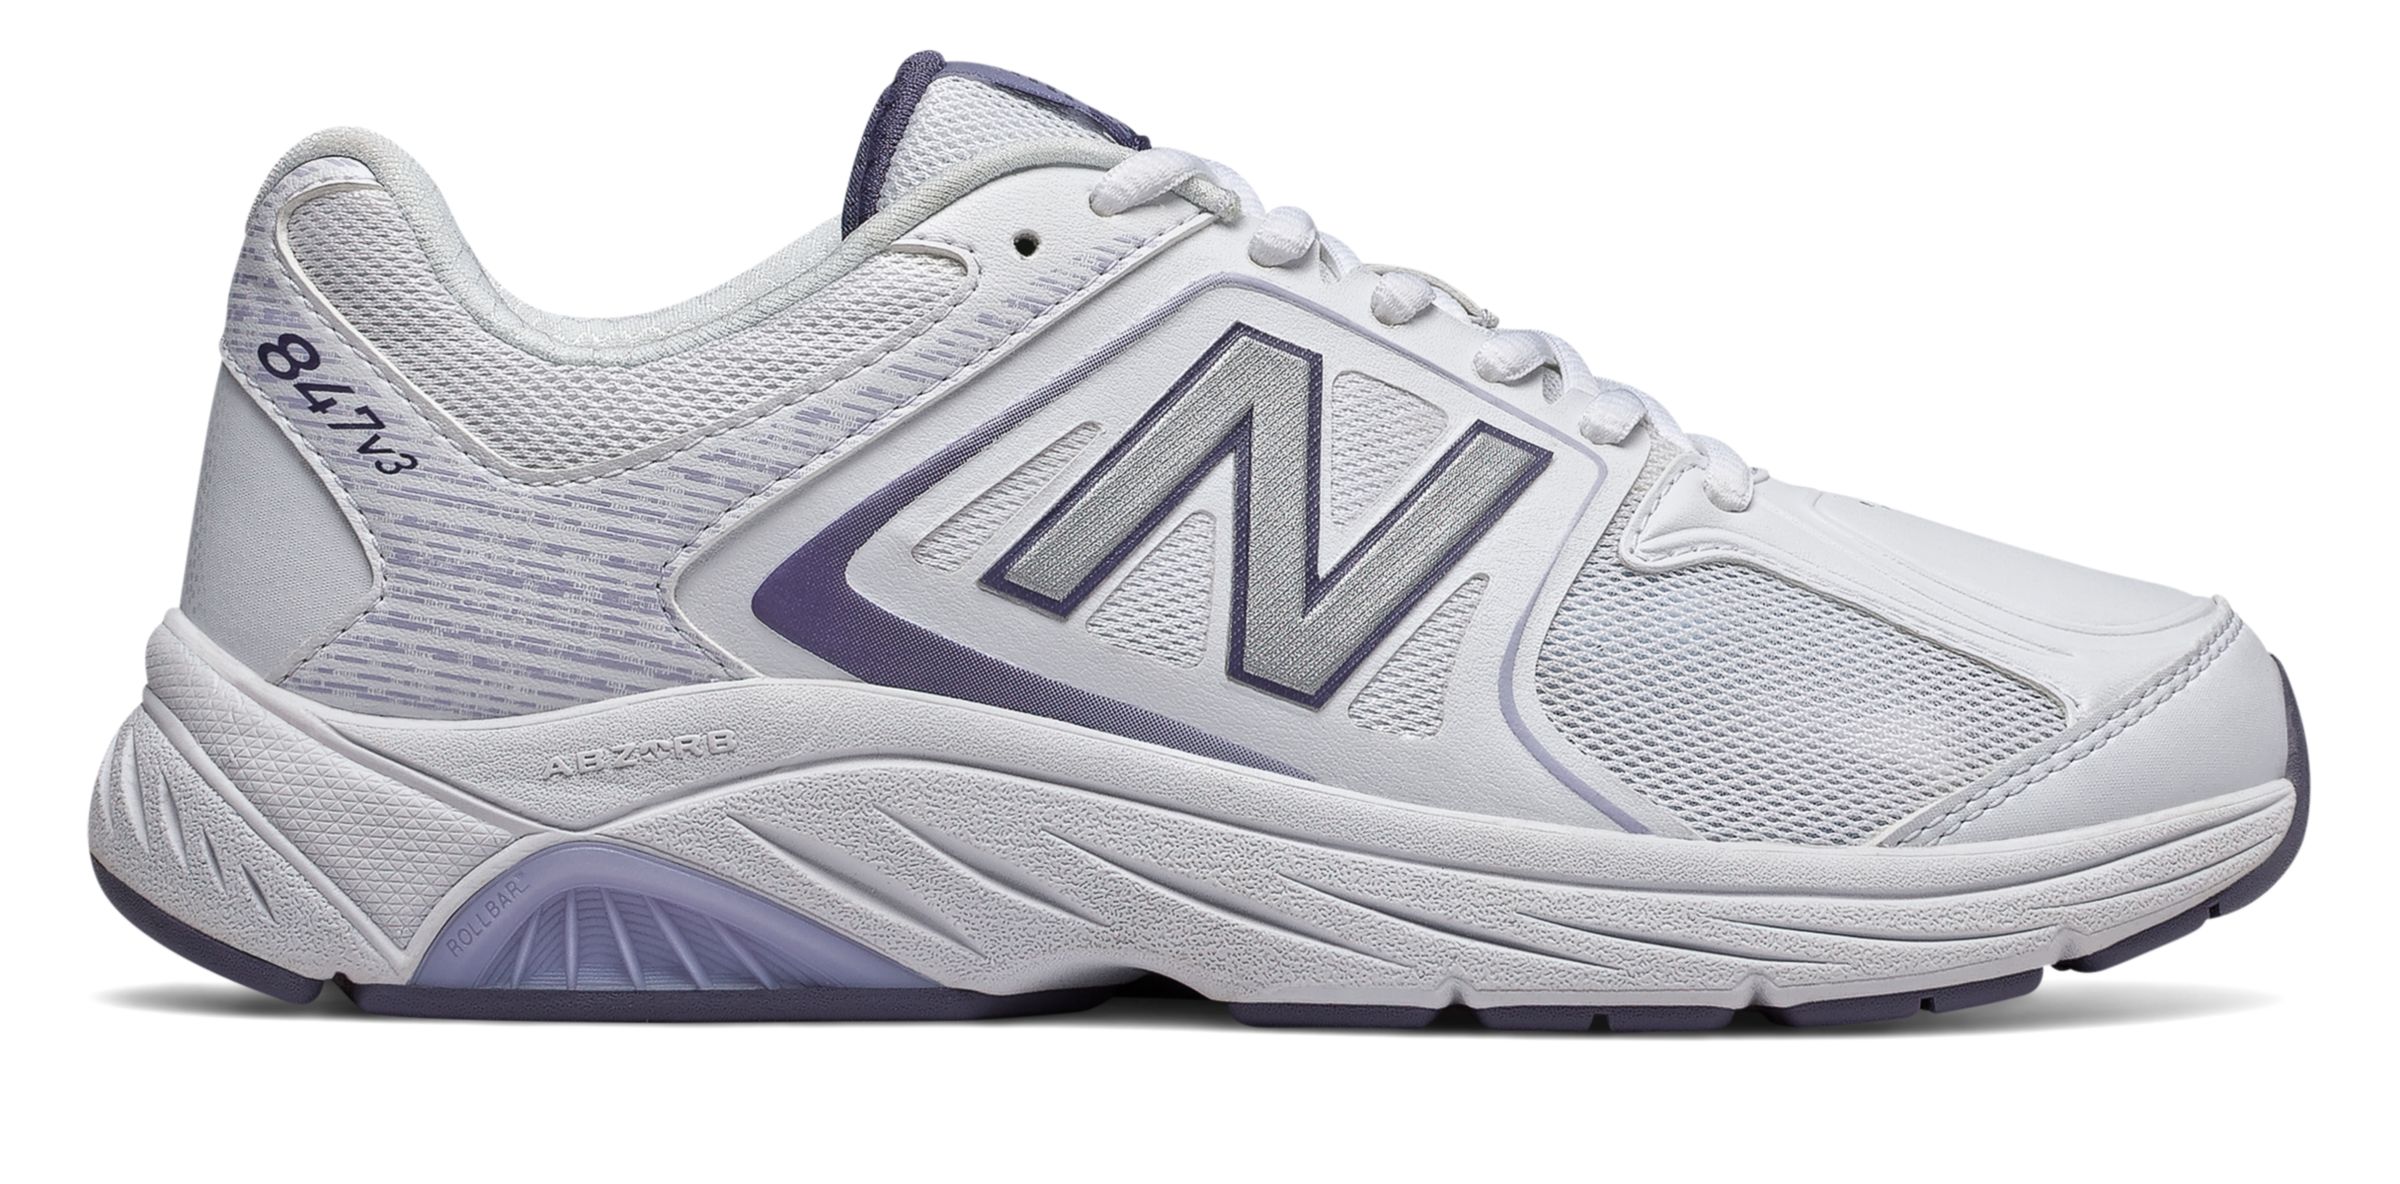 Off on WW847WT3 at Joe's New Balance Outlet